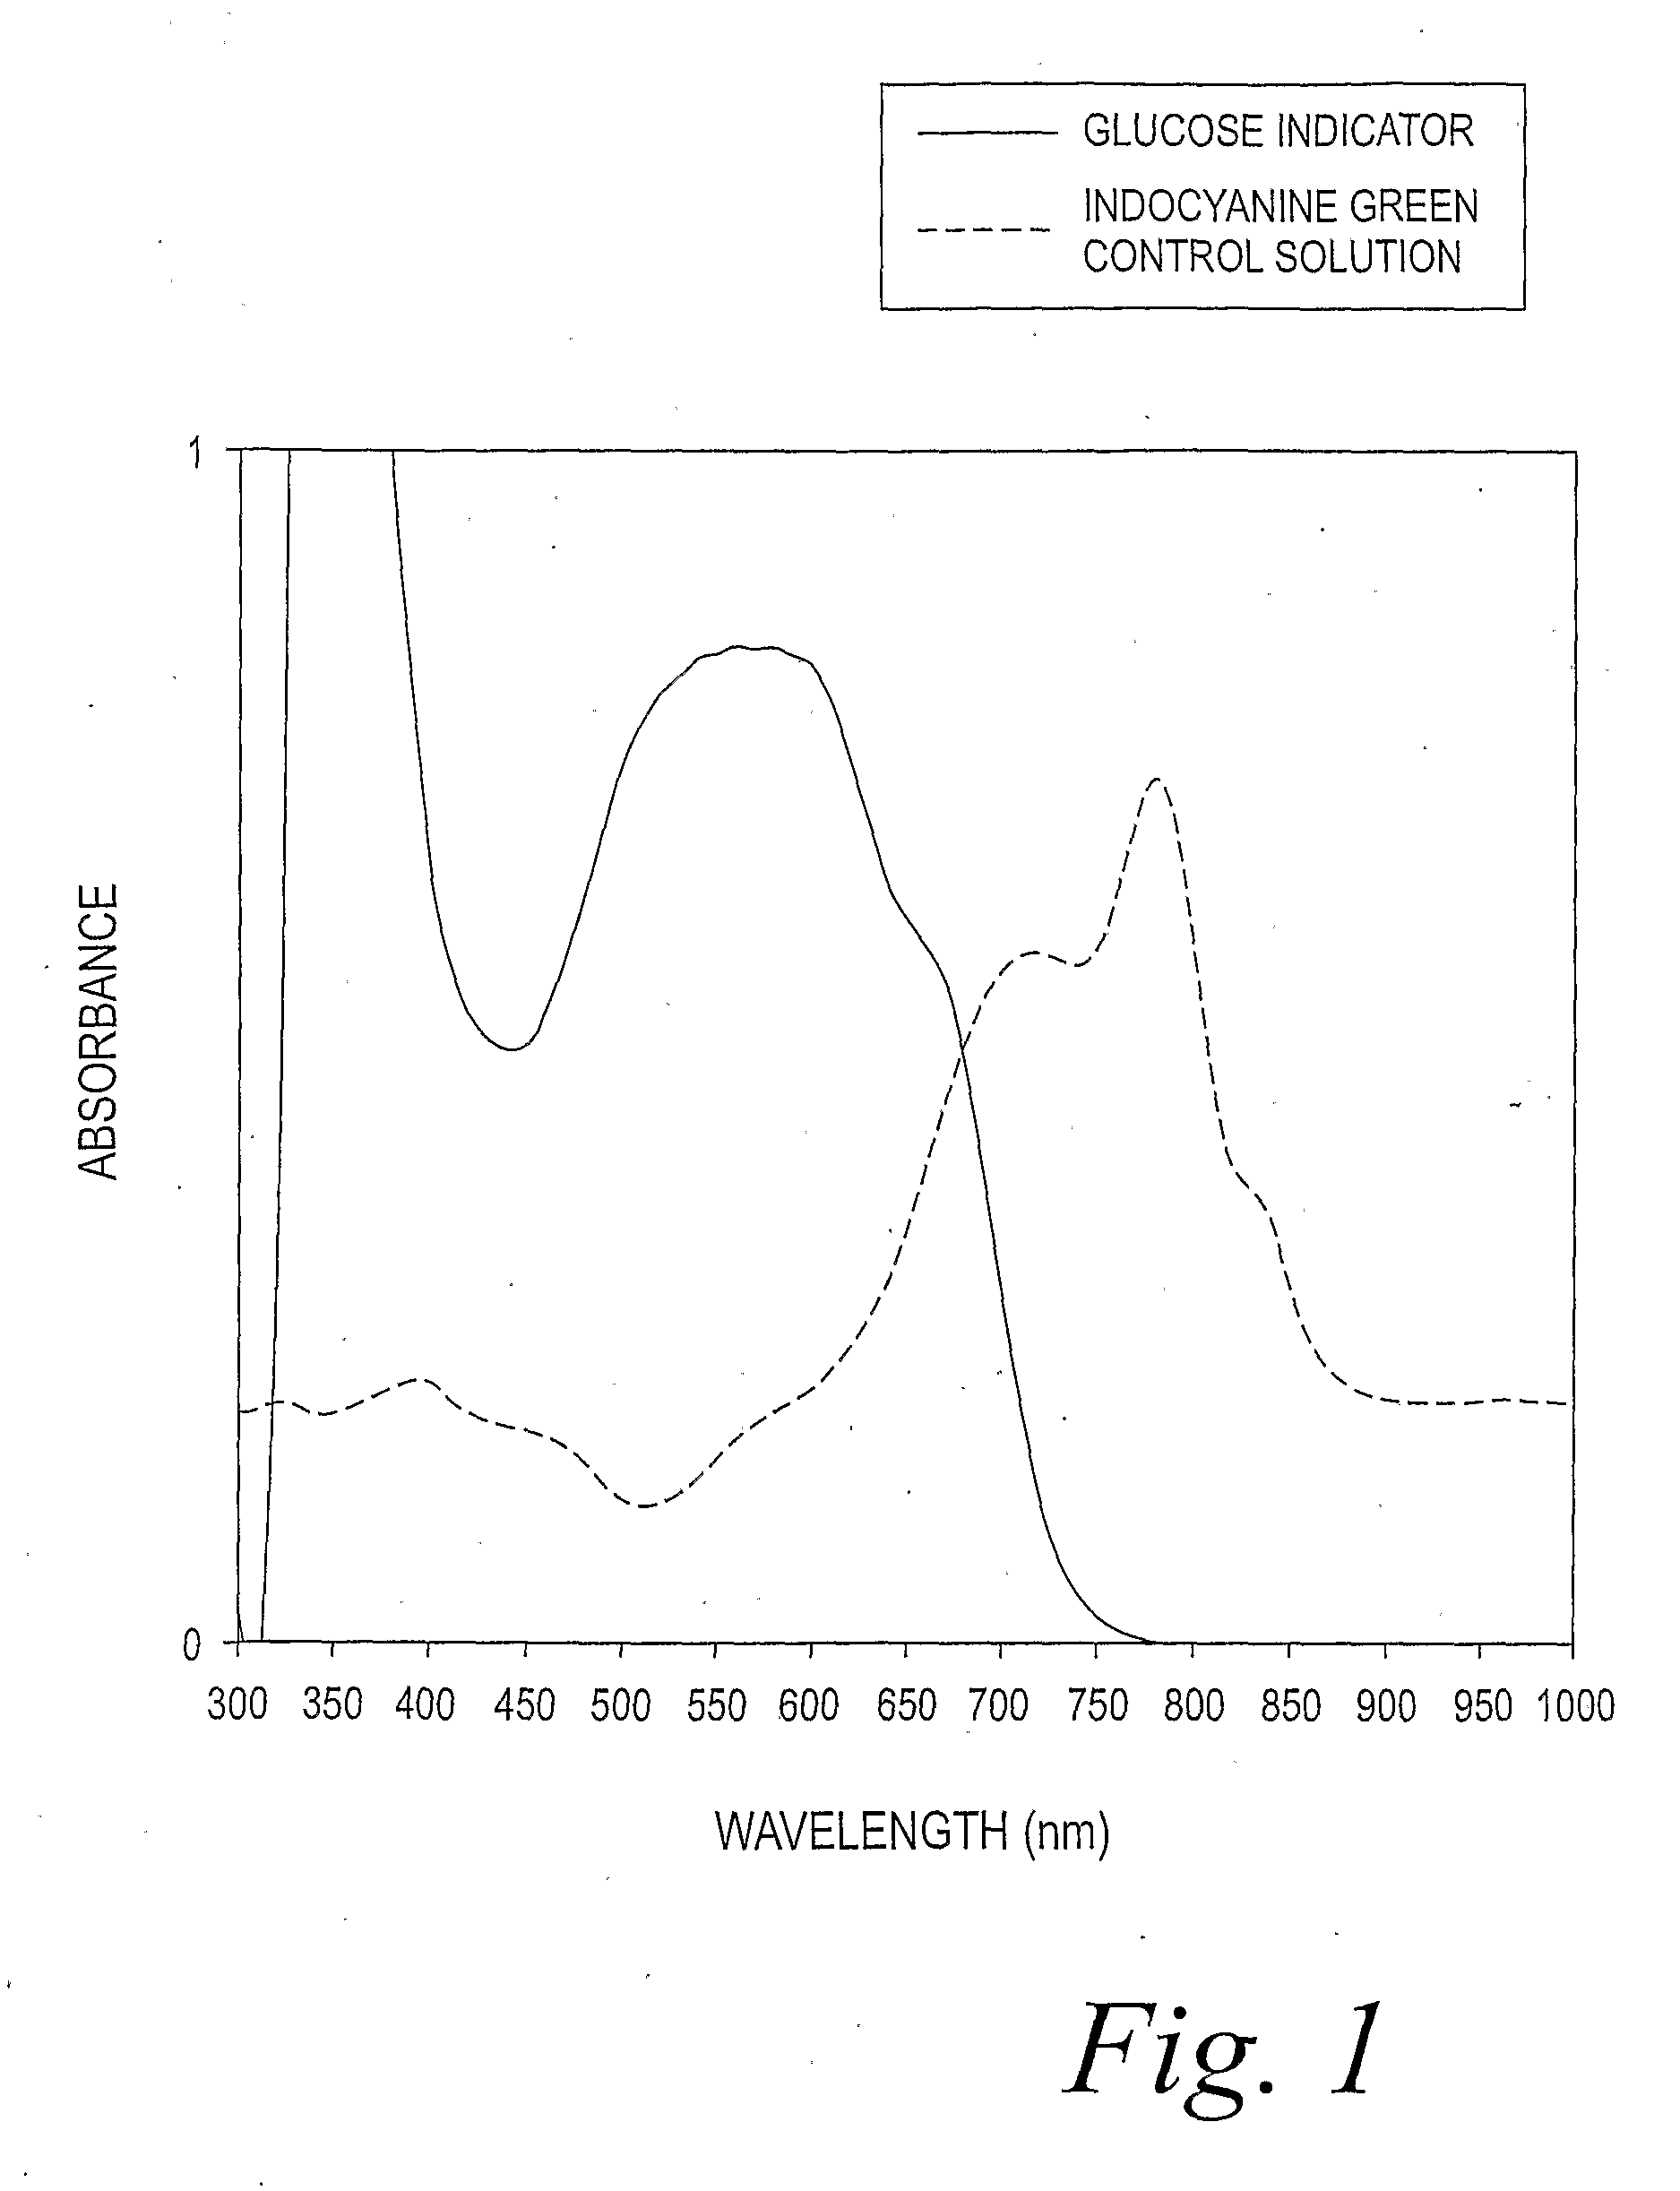 Method of Differentiating Between Blood and Control Solutions Containing a Common Analyte